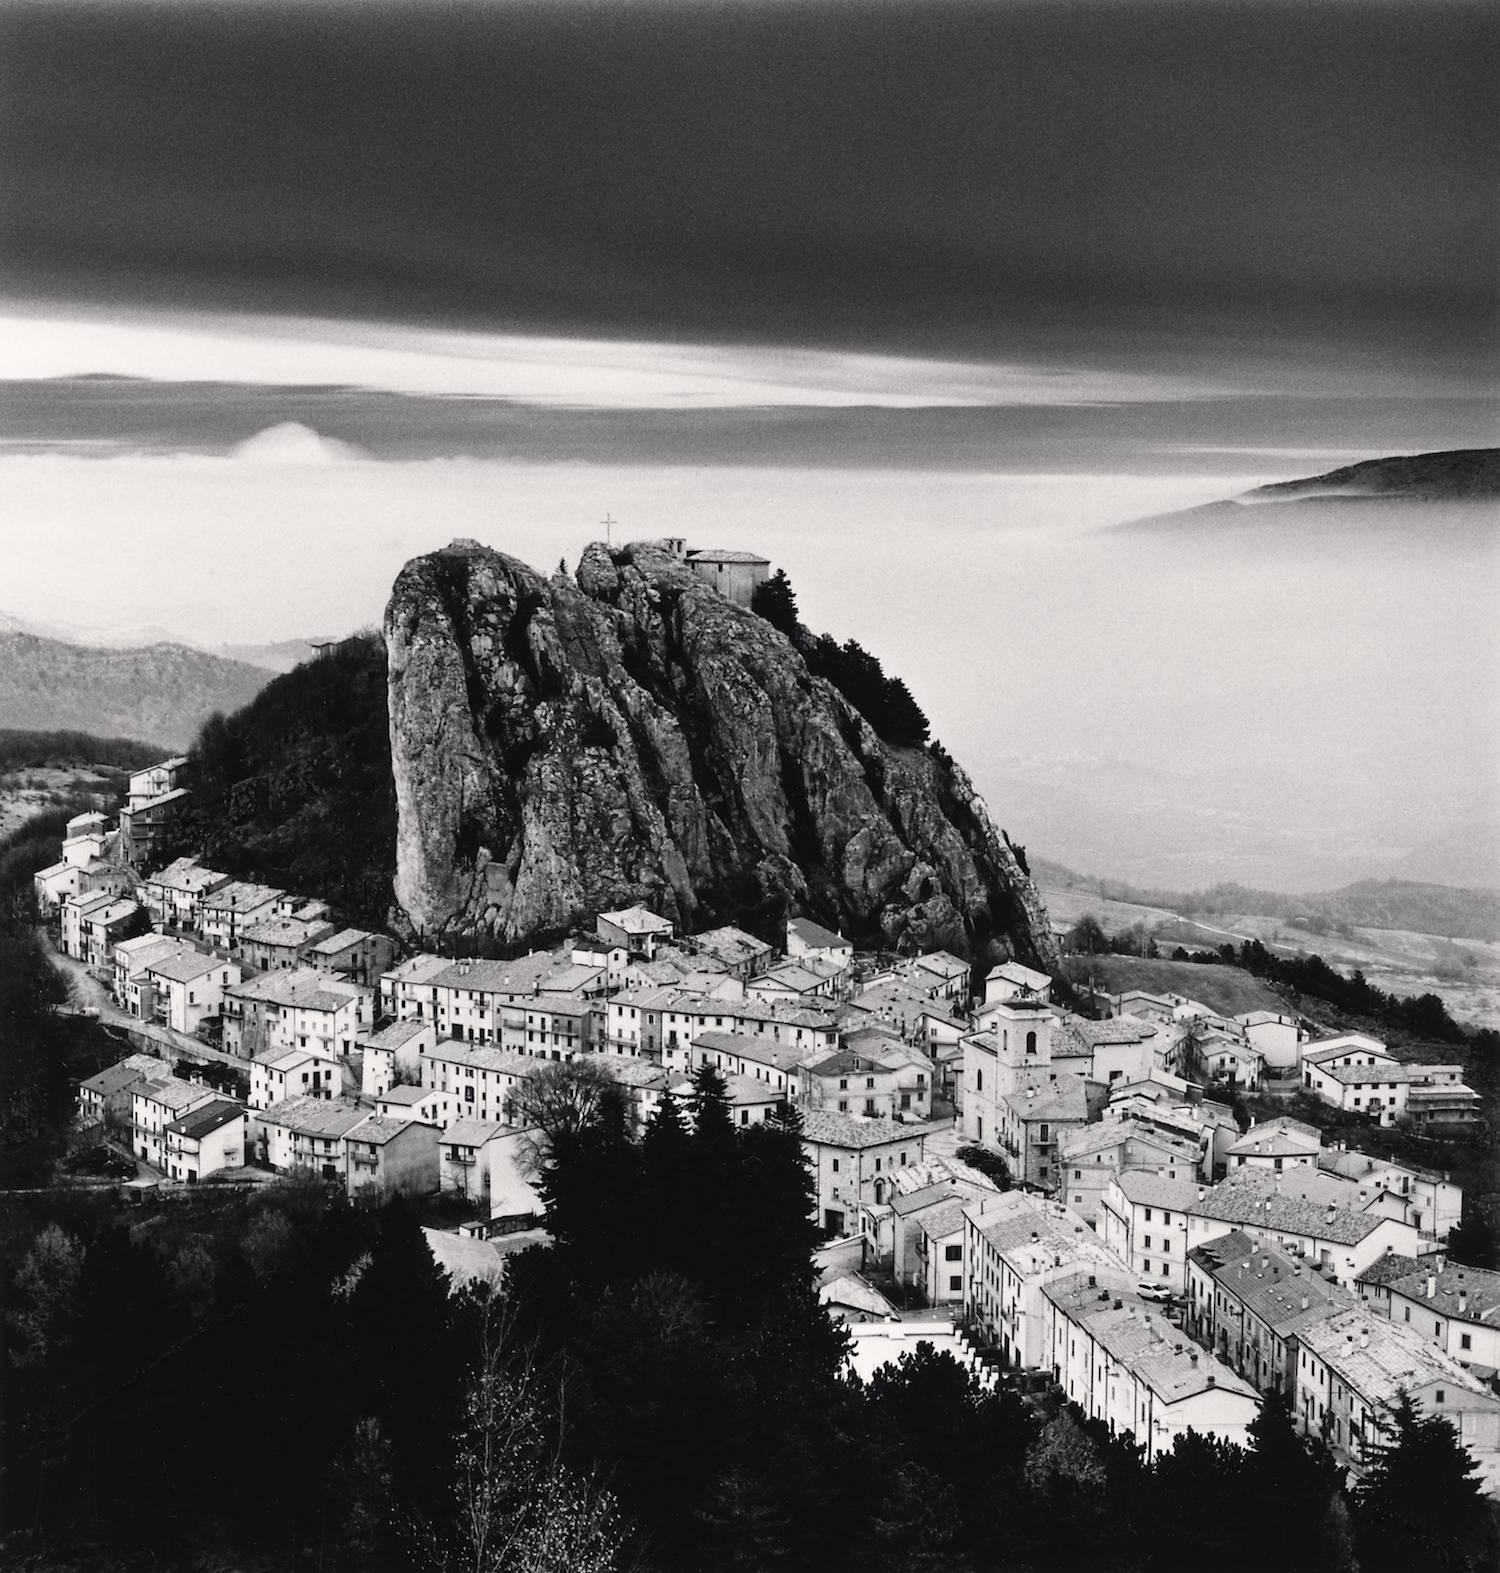 Michael Kenna Black and White Photograph – Approaching Clouds, Pizzoferato, Abruzzo, Italien